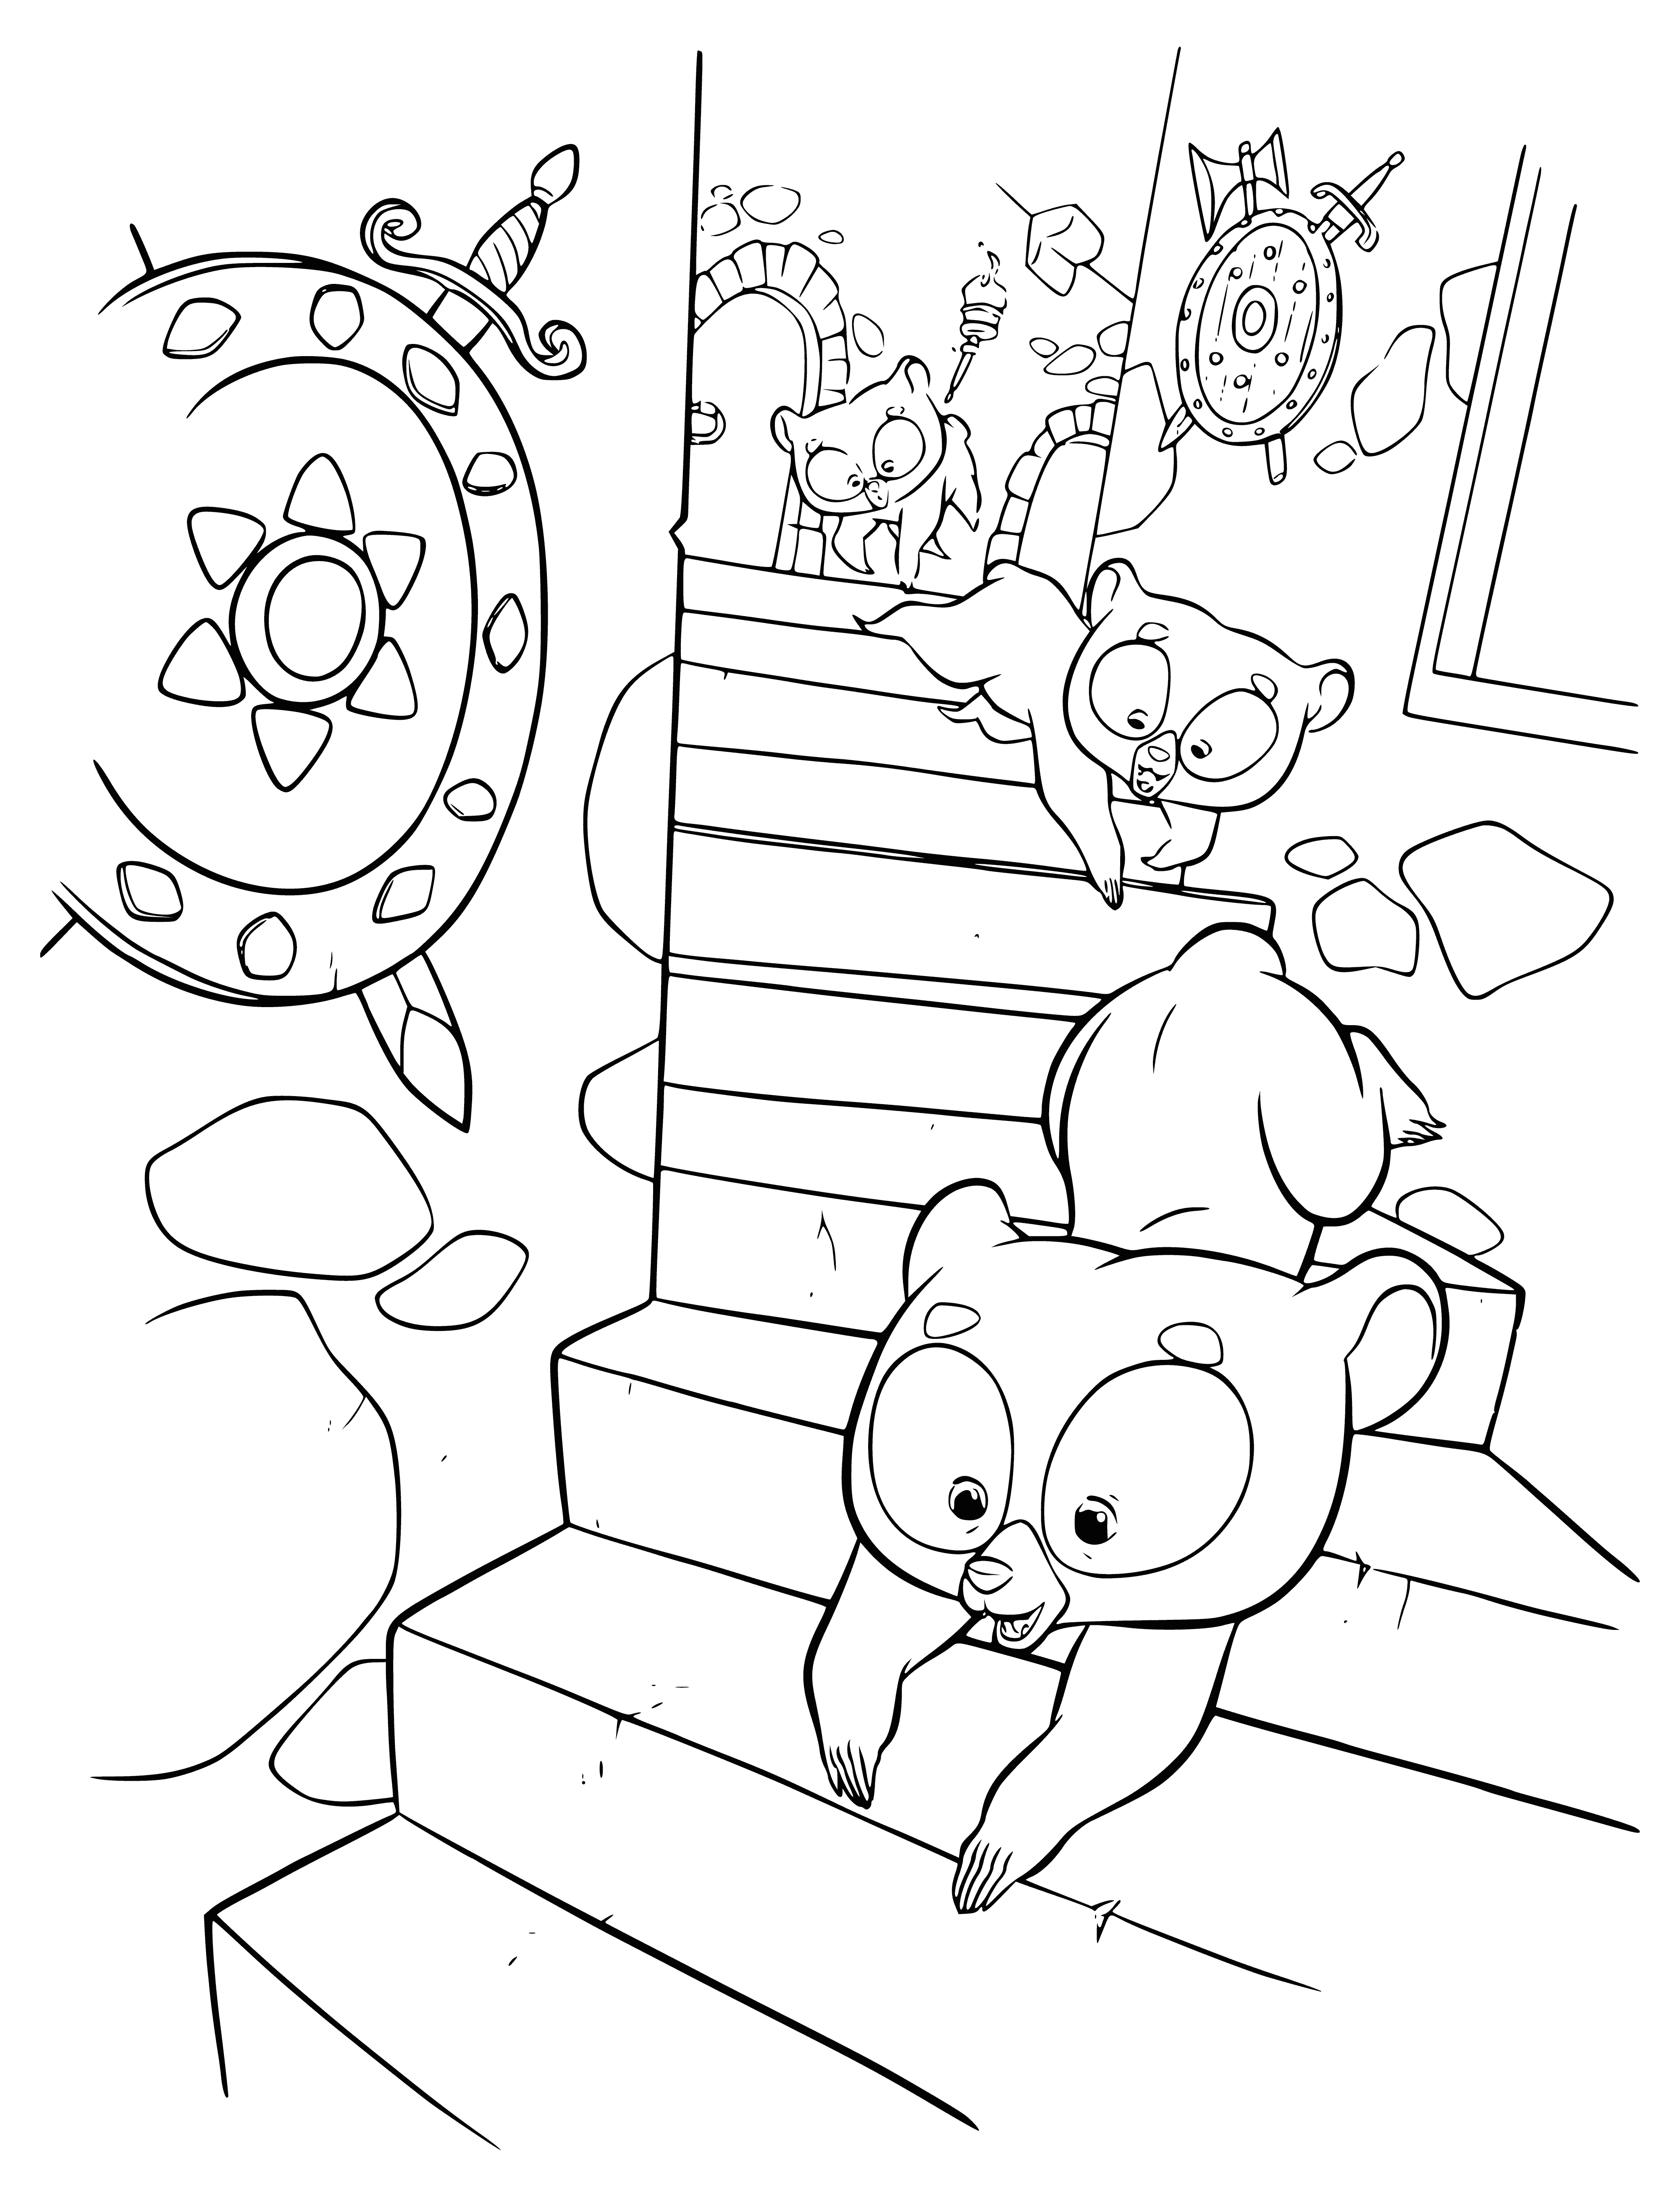 Teddy bears running down the stairs coloring page